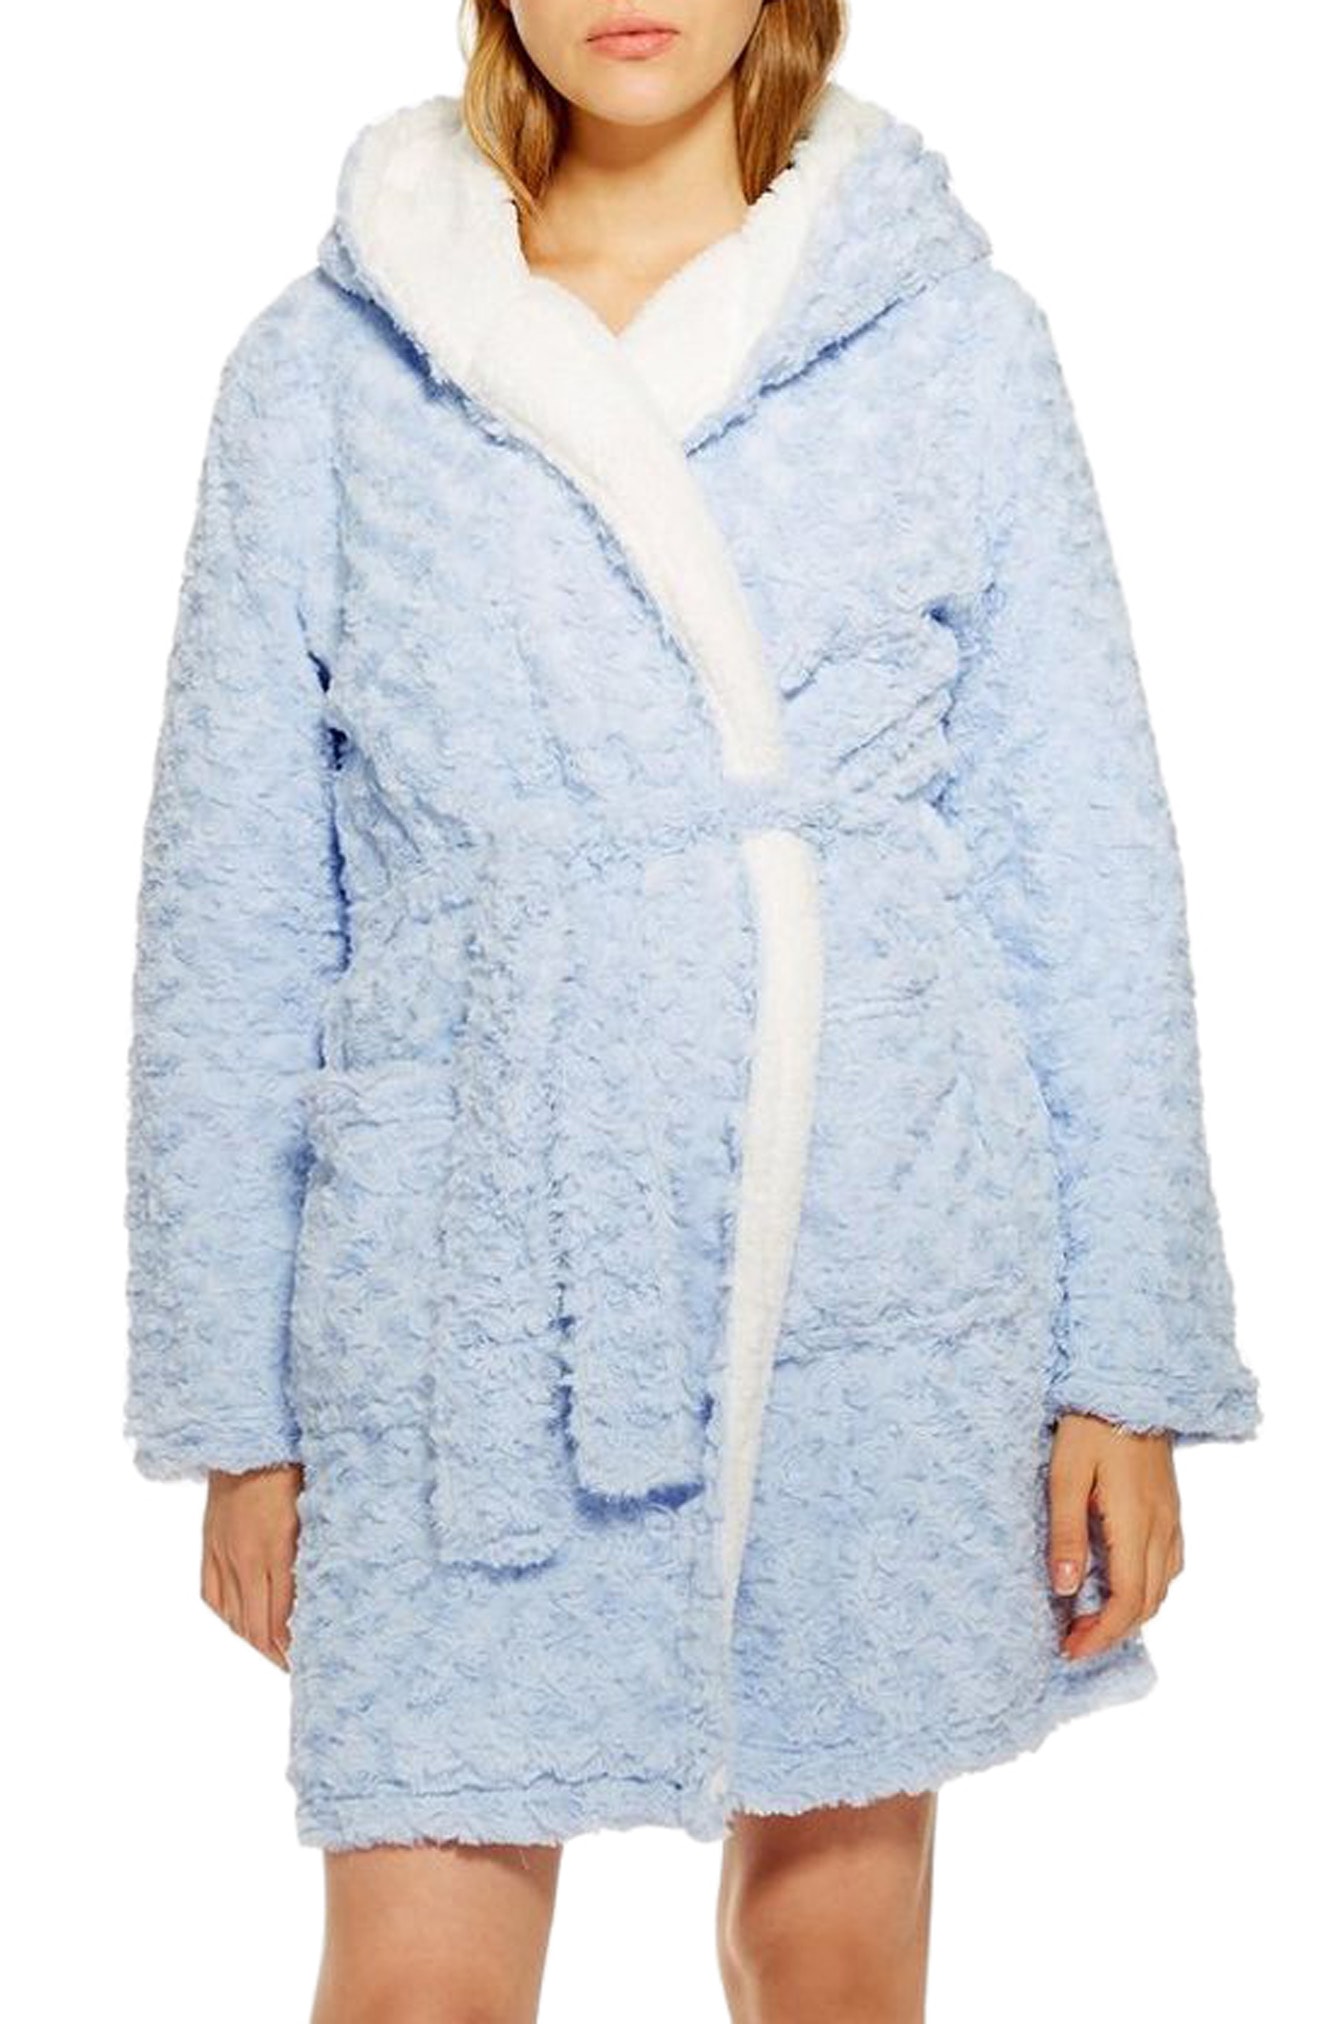 Topshop Fluffy Faux Fur Hooded Robe